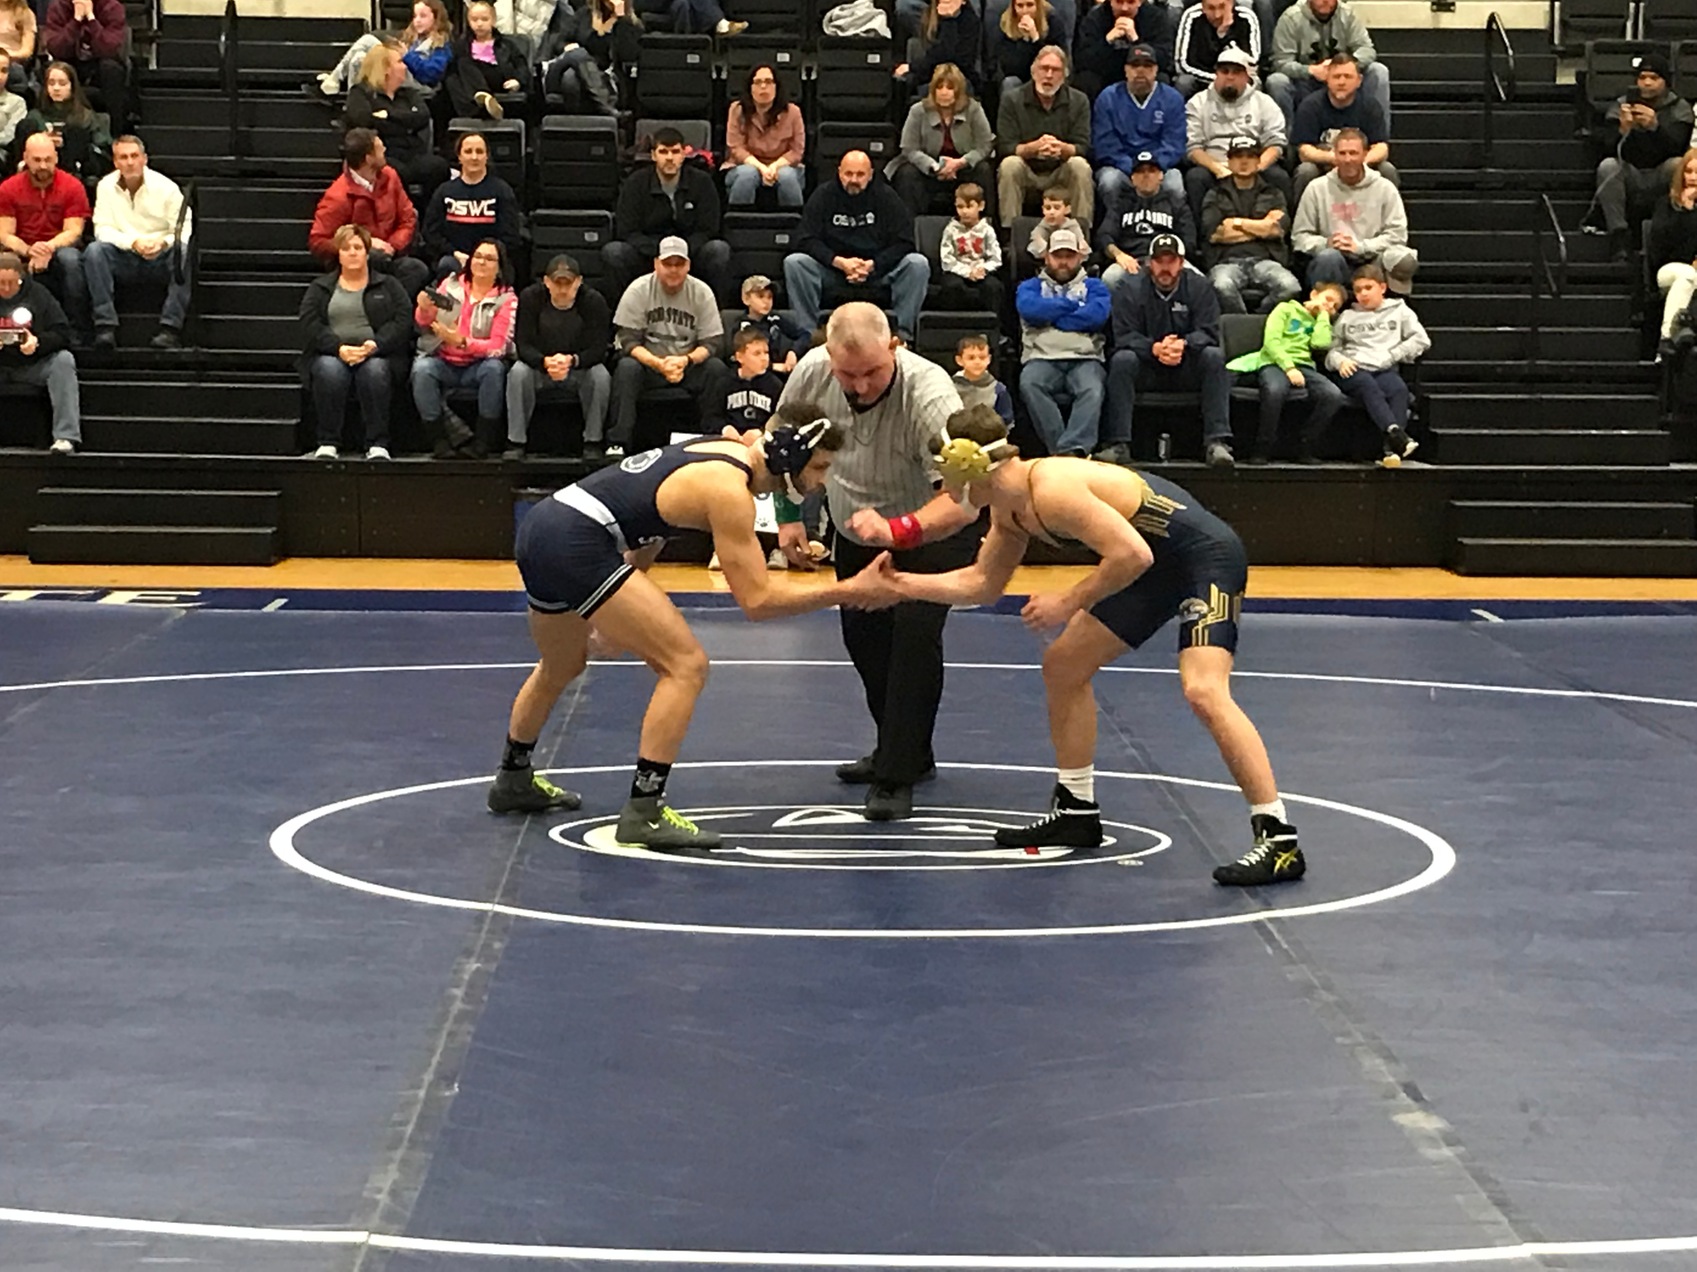 Seniors honored in strong team win by Roaring Lions wrestling